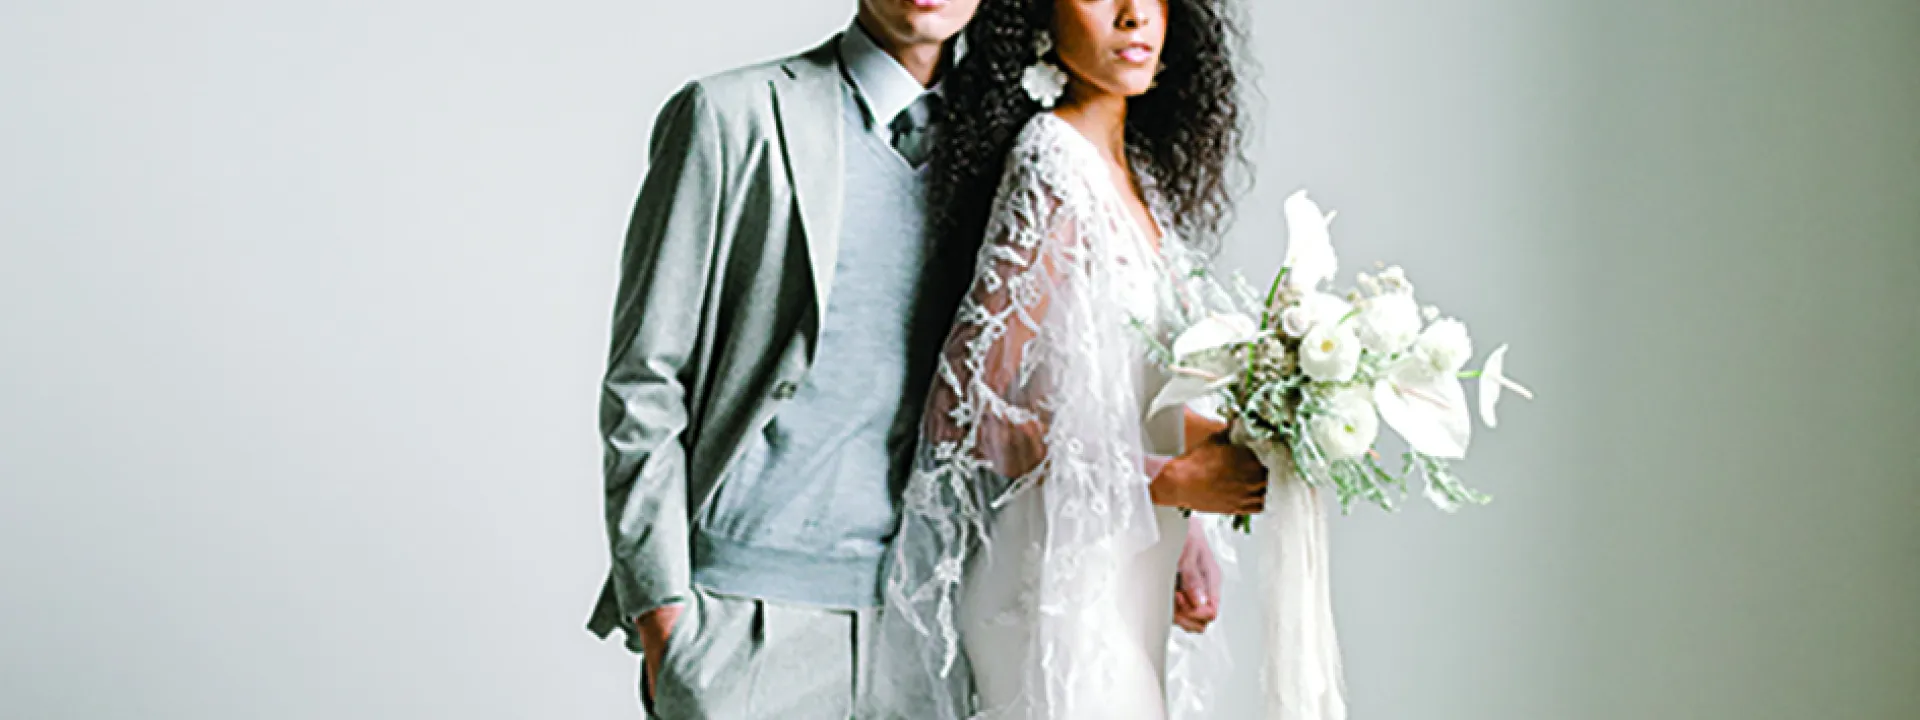 Grays and stark whites make up the bride and groom's attire